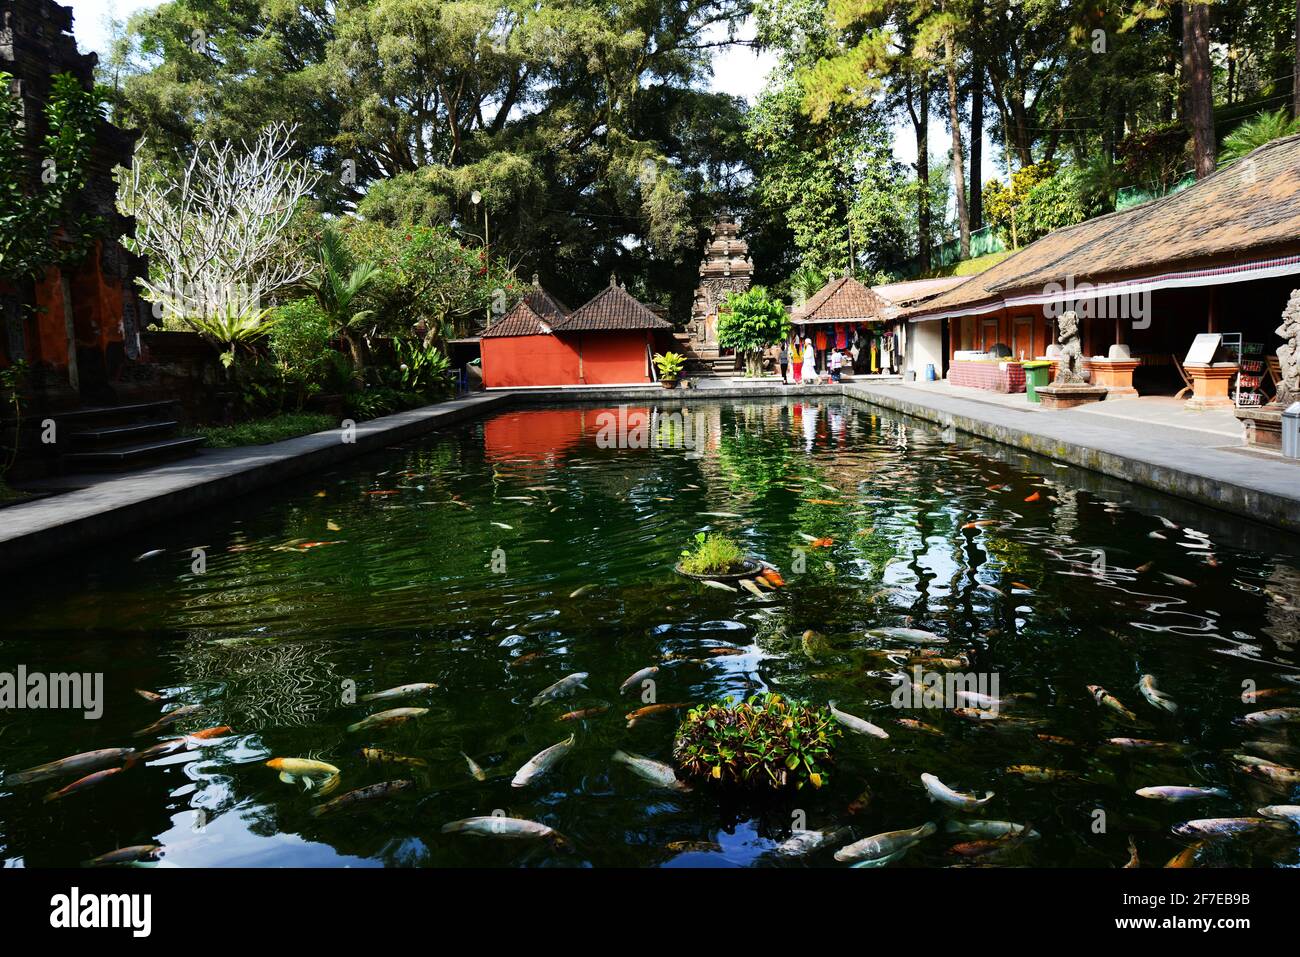 Koi fish in a pond inside the Tirta Empul temple in Bali, Indonesia Stock  Photo - Alamy